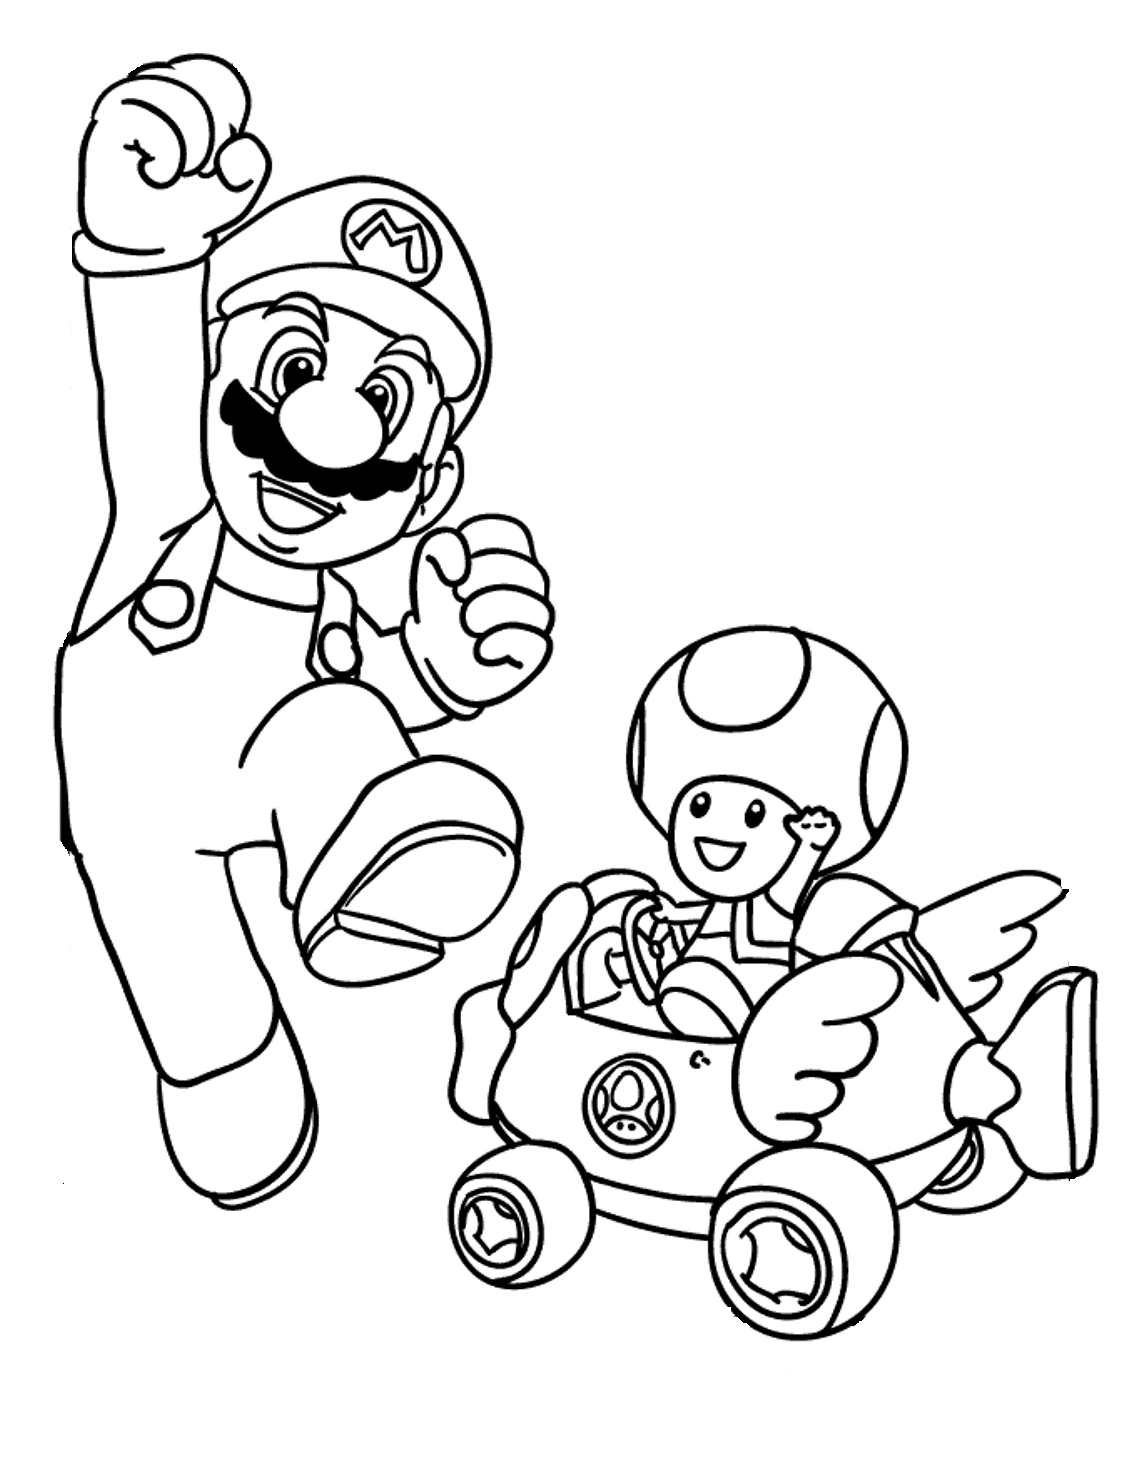 mario pictures to print monster from mario cartoon coloring pages for kids print mario pictures to 